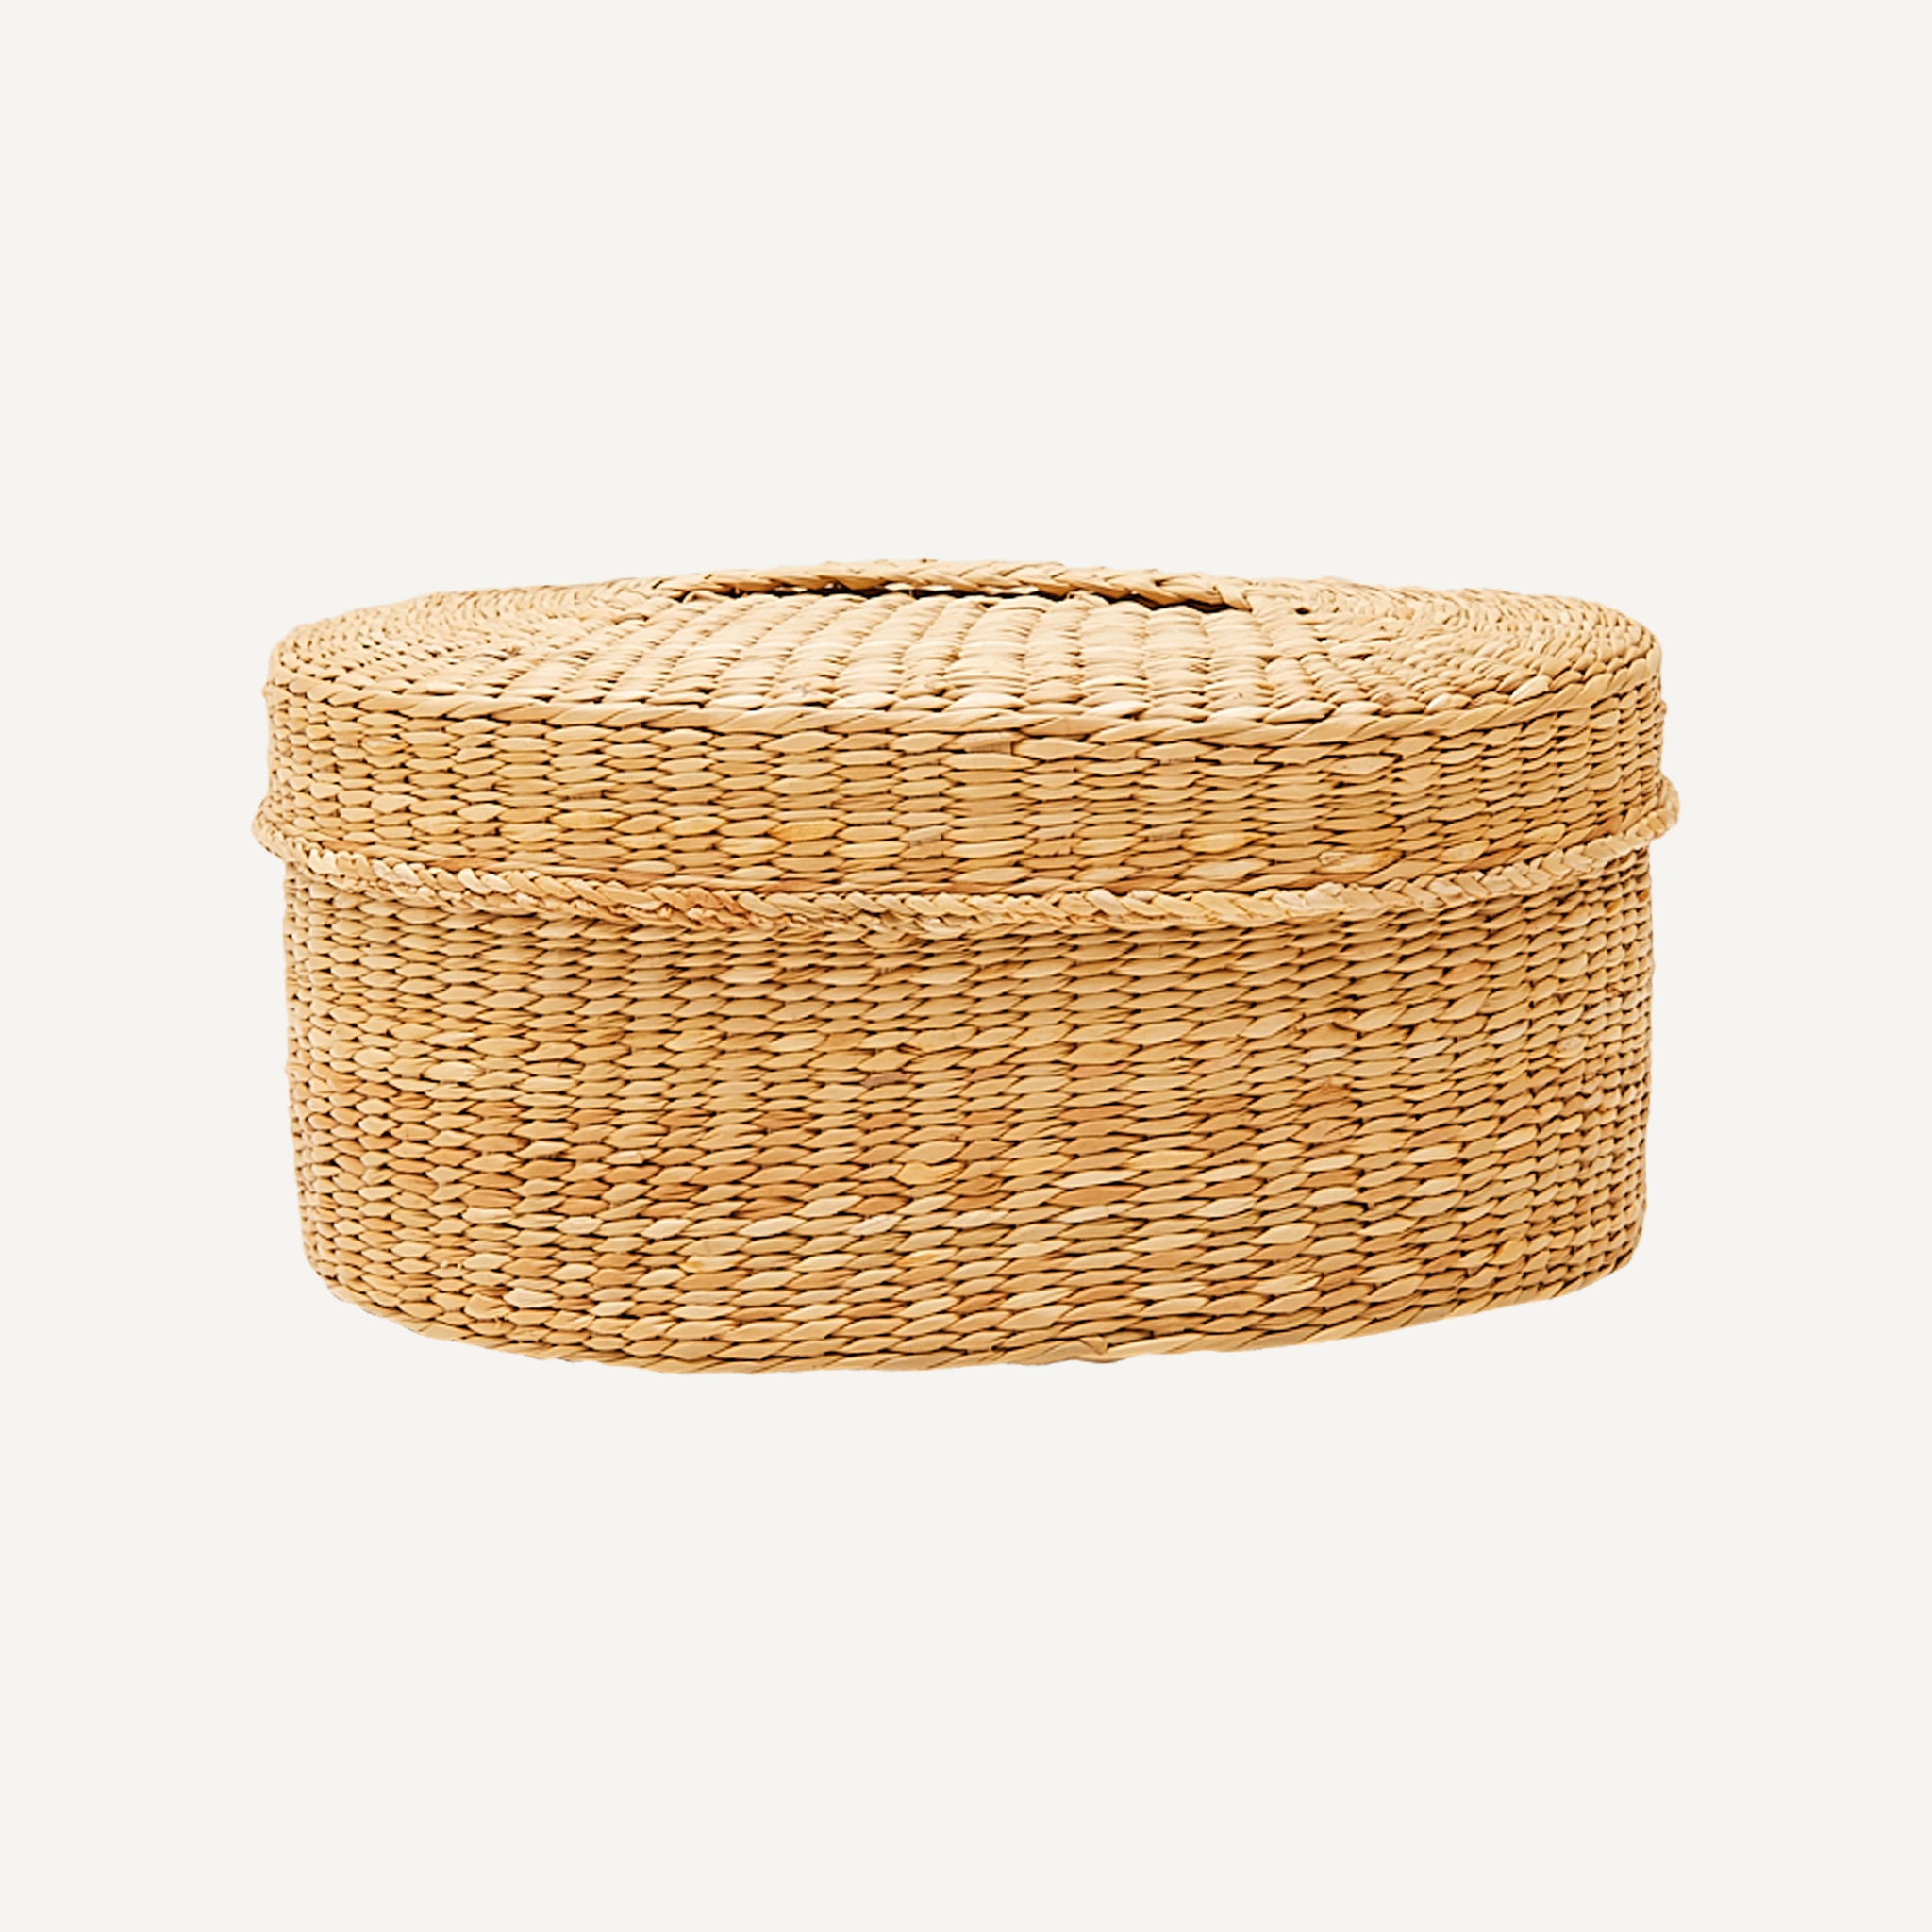 VINTAGE STACKING SEAGRASS BASKETS